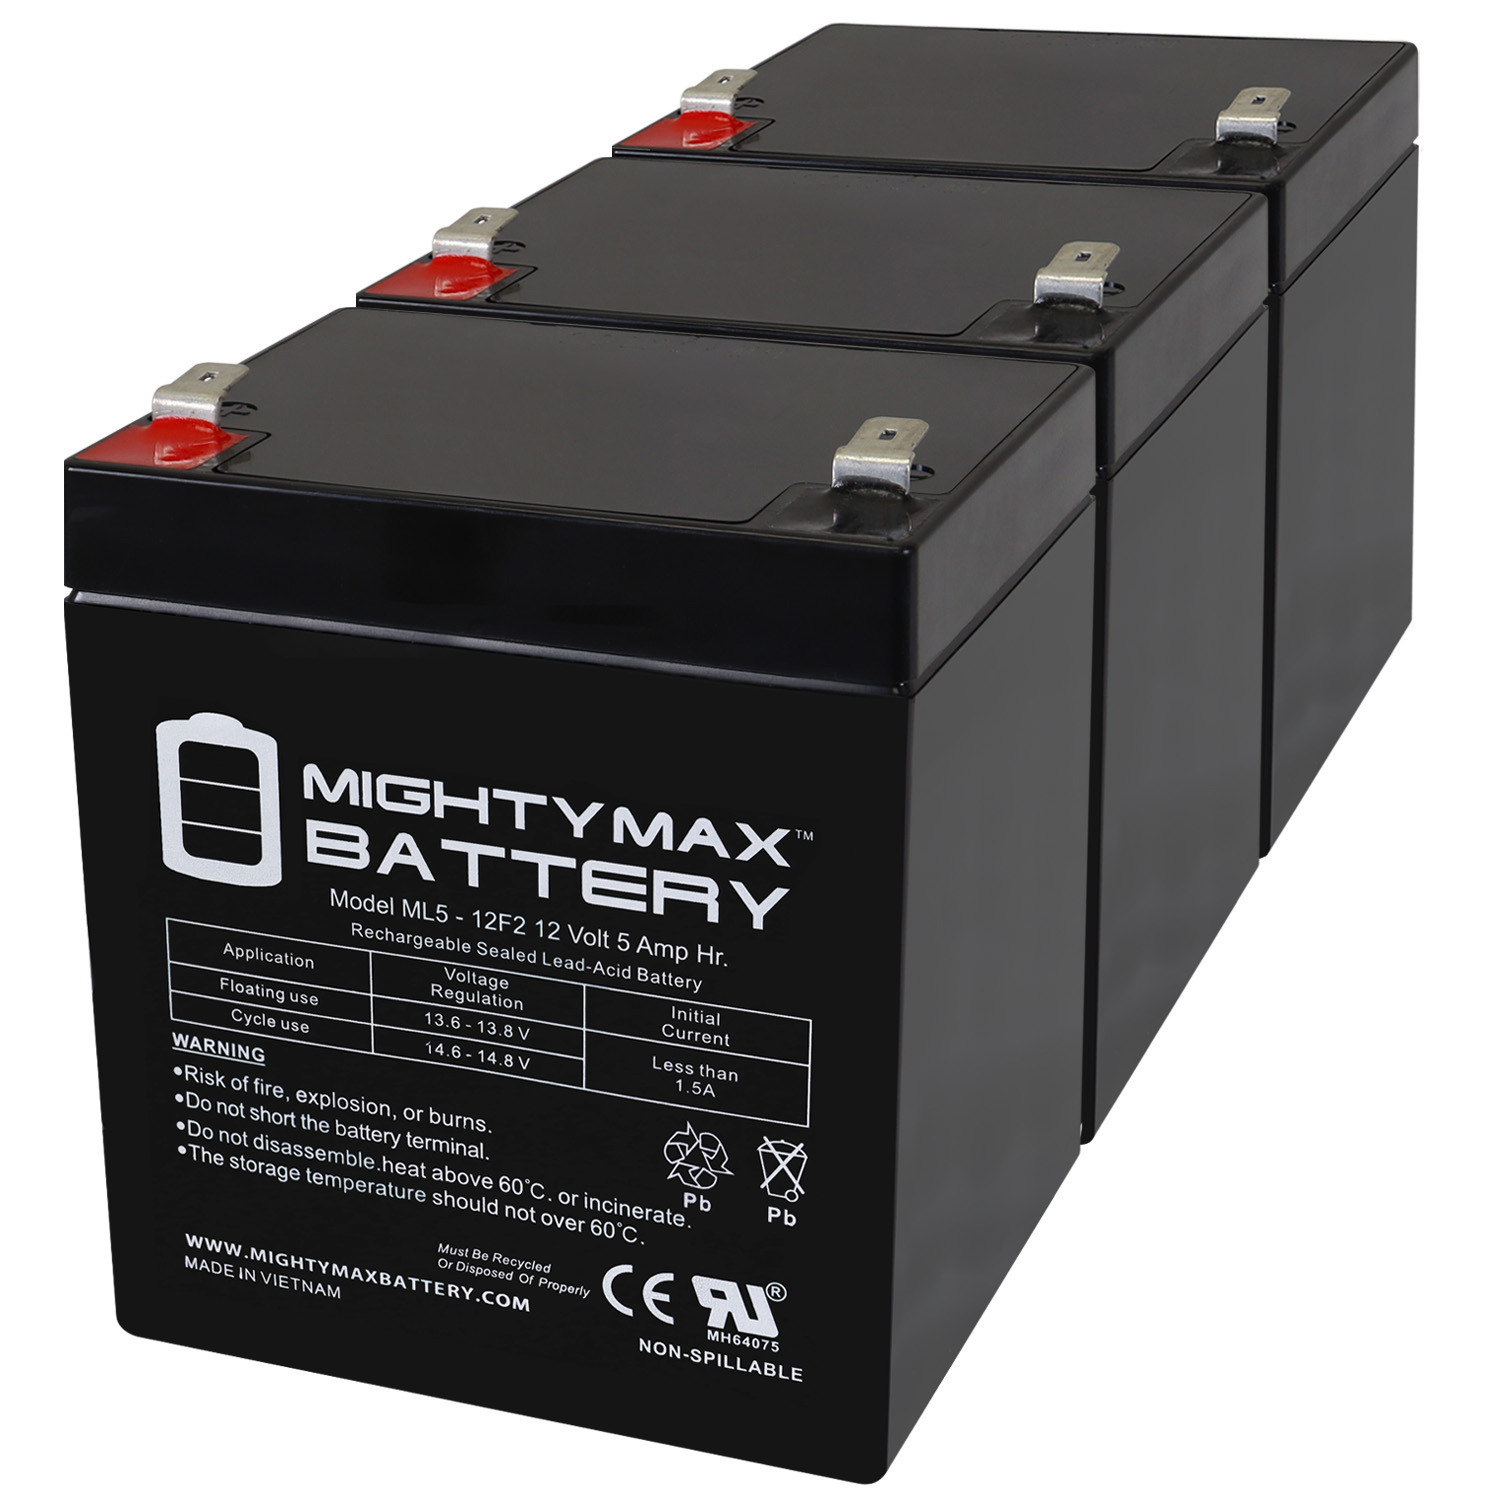 12V 5Ah F2 SLA Replacement Battery for Mongoose M150 Scooter - 3 Pack